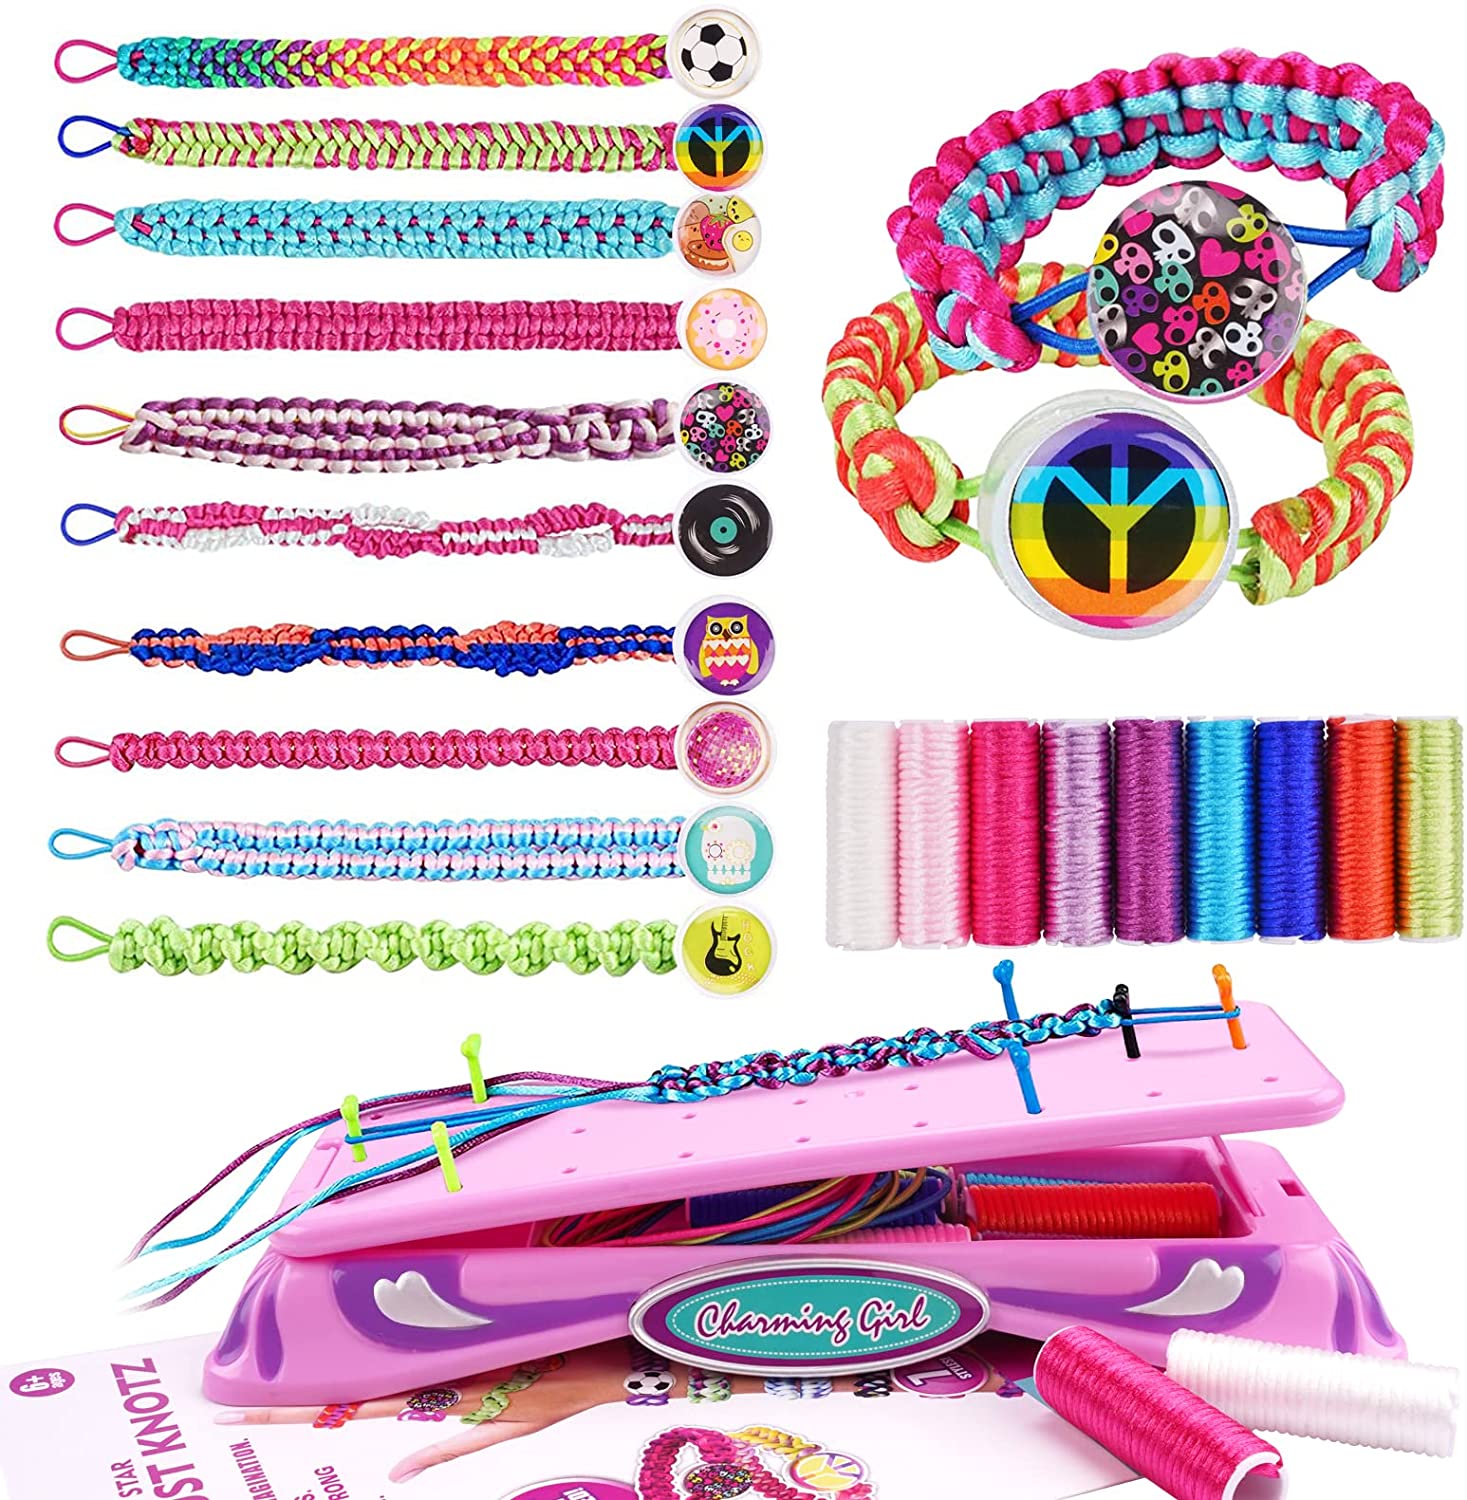 Creative Toy for Preteen & Teenagers Teen Girl Birthday Gifts Ideas Jewelry Making Kit for Kids and Tween Girls Age 8-14 Year Old Craft 'n Clay Arts & Crafts Christmas Gift DIY Bracelet Kits 